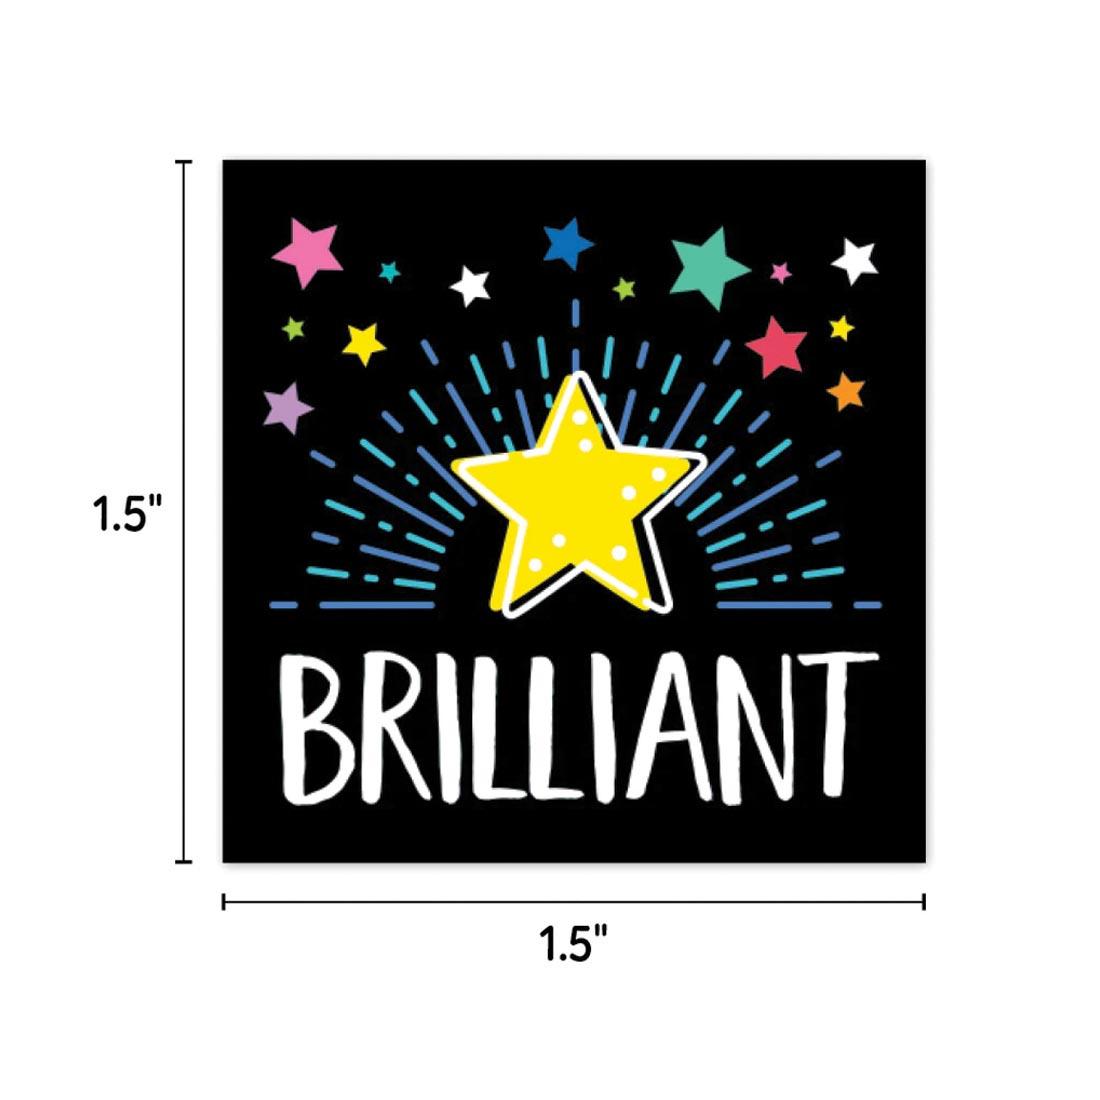 Brilliant Reward Sticker from the Star Bright collection by Creative Teaching Press labeled with the measurements 1.5" x 1.5"